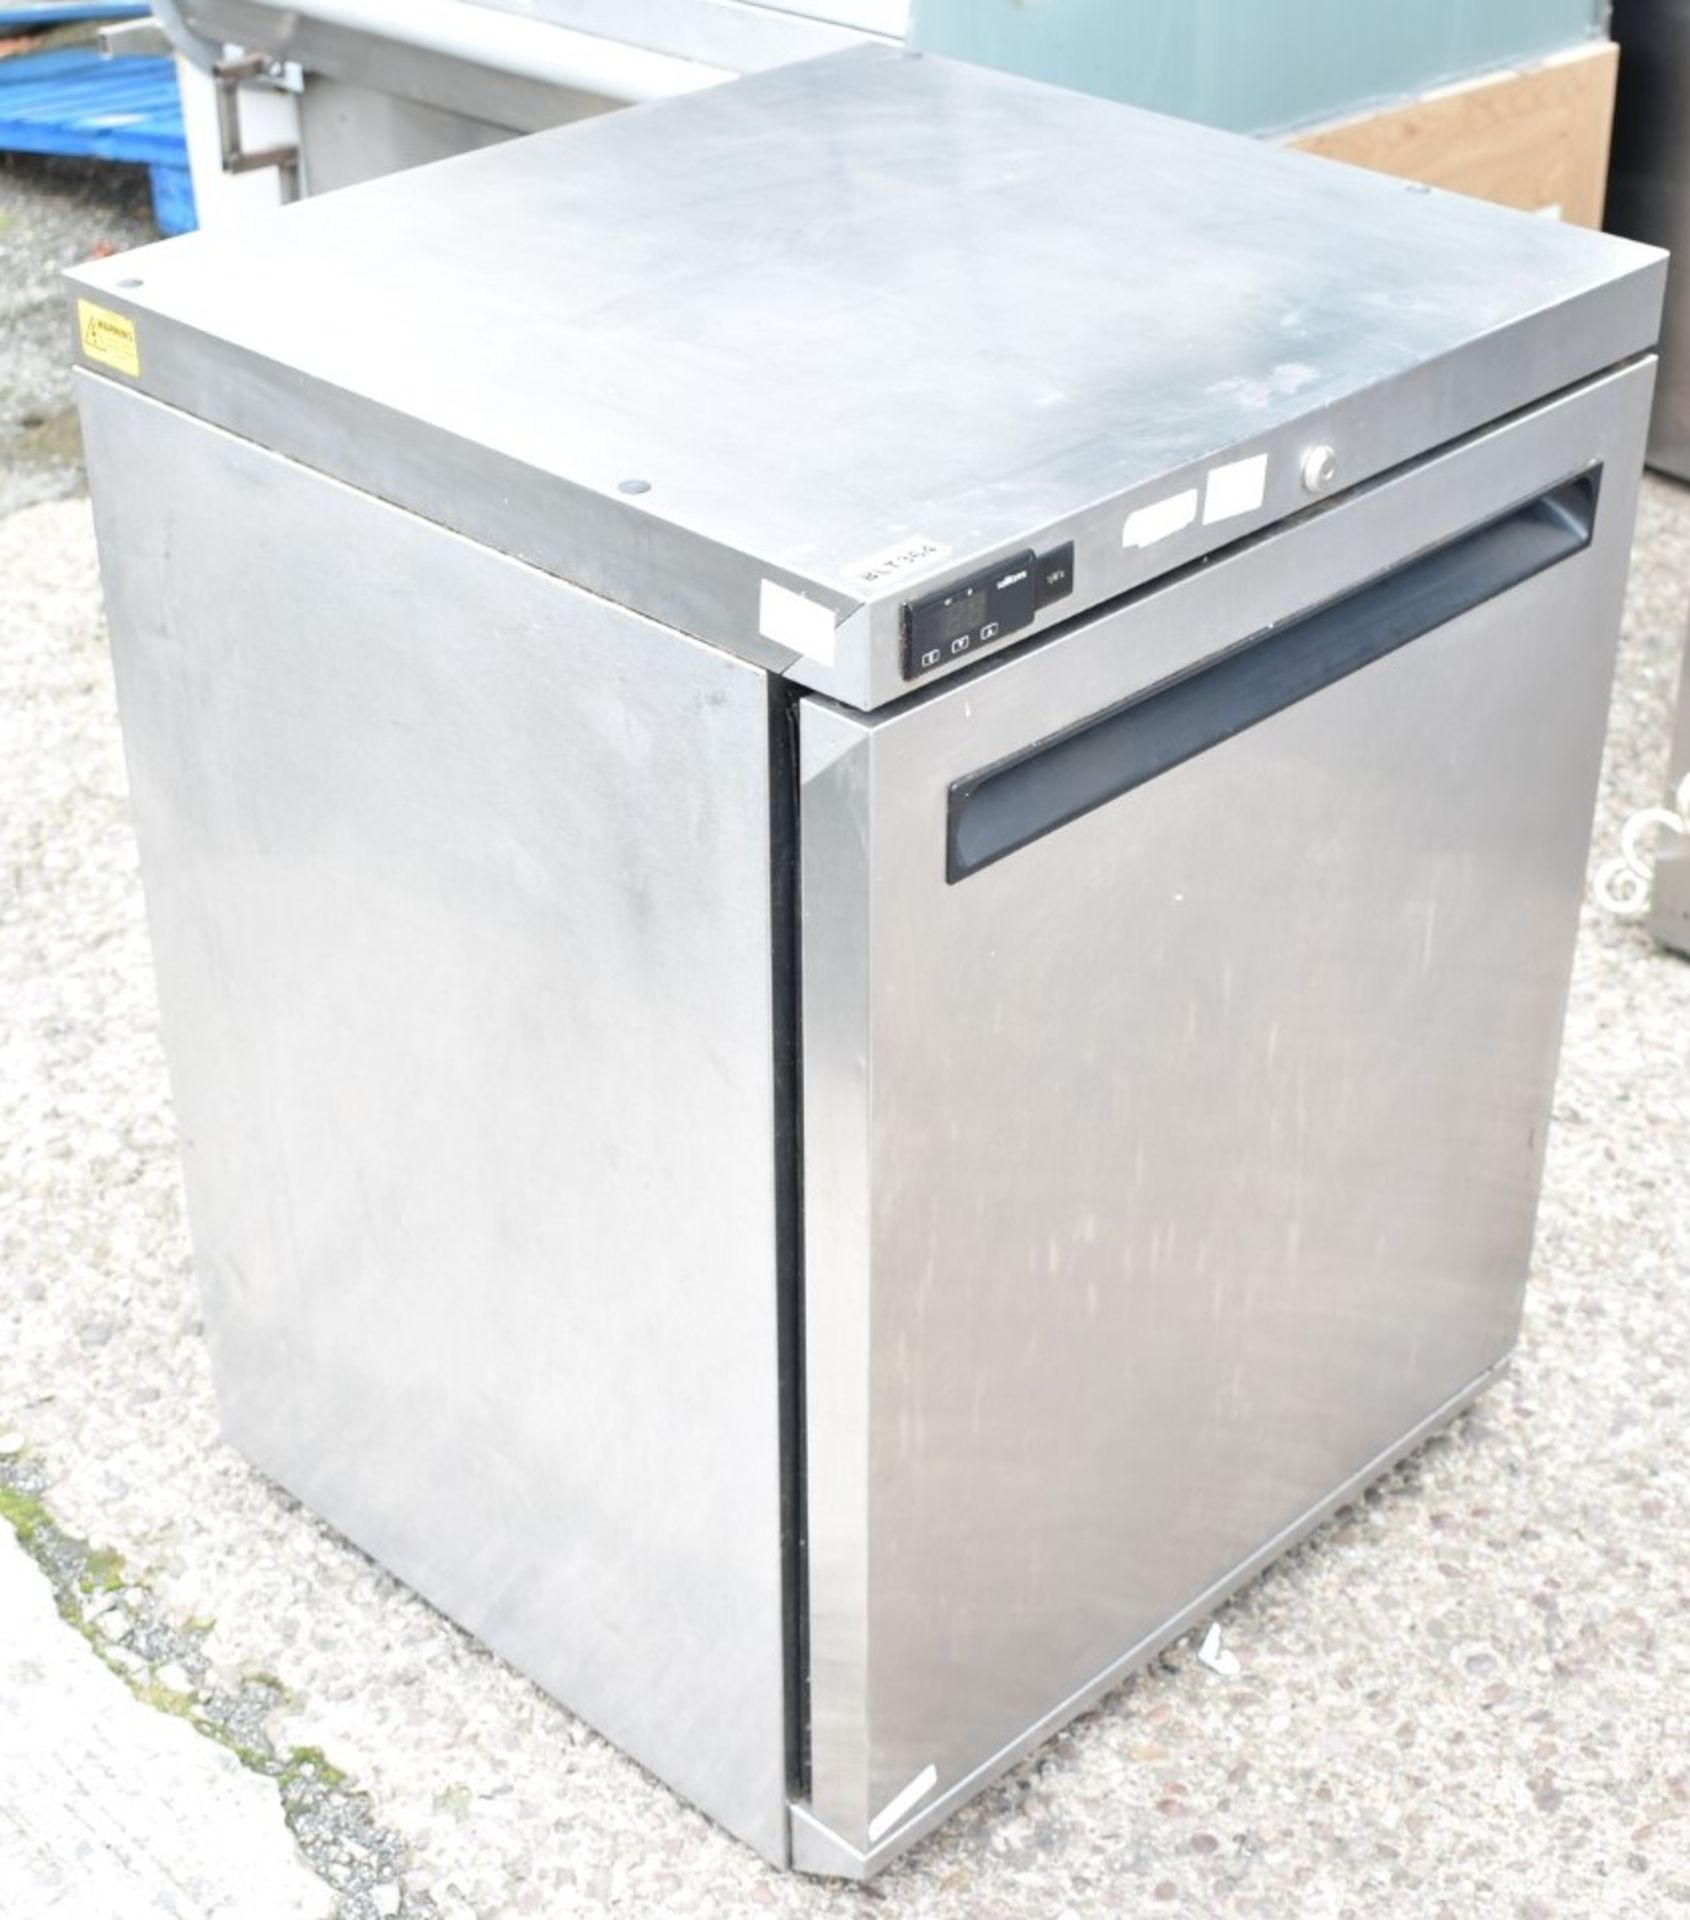 1 x Williams Single Door Under Counter Fridge - H82.5 x W65 x D65 cms - Stainless Steel Exterior - - Image 3 of 5